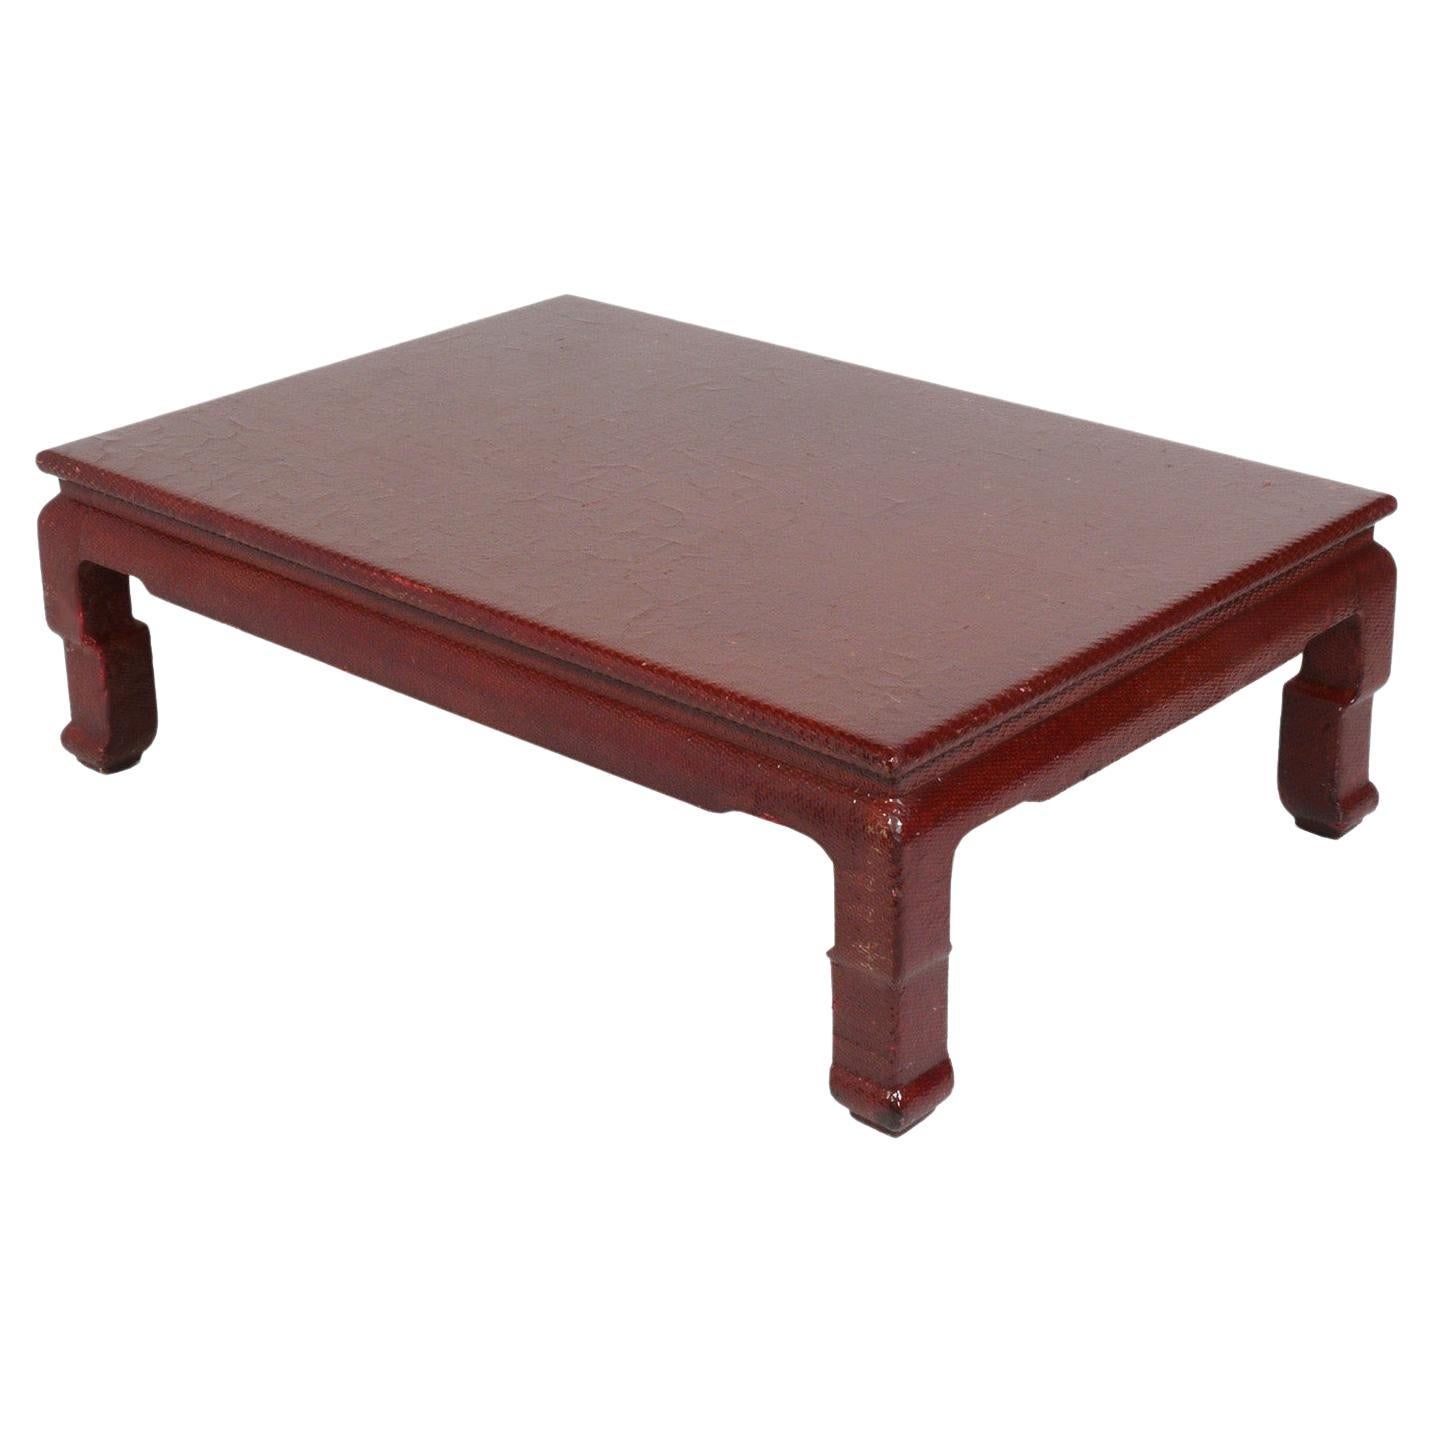 Chinoiserie Raffia Wrapped Coffee Table Refinished In Your Choice of Color